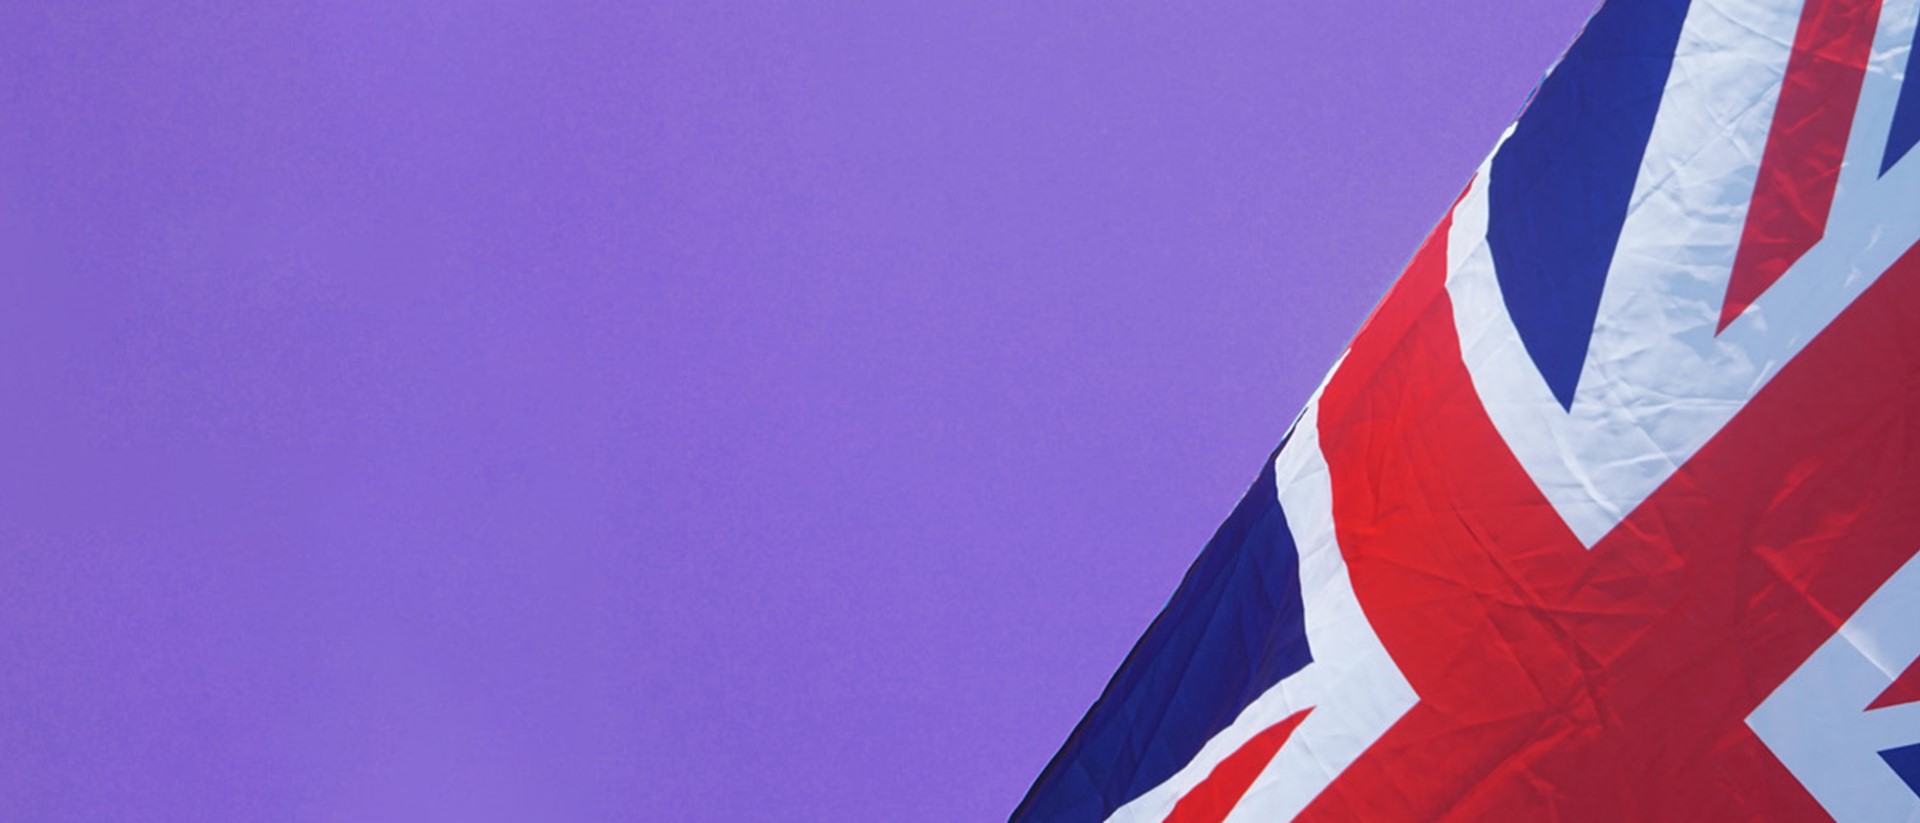 Image of a union jack flag against a purple background